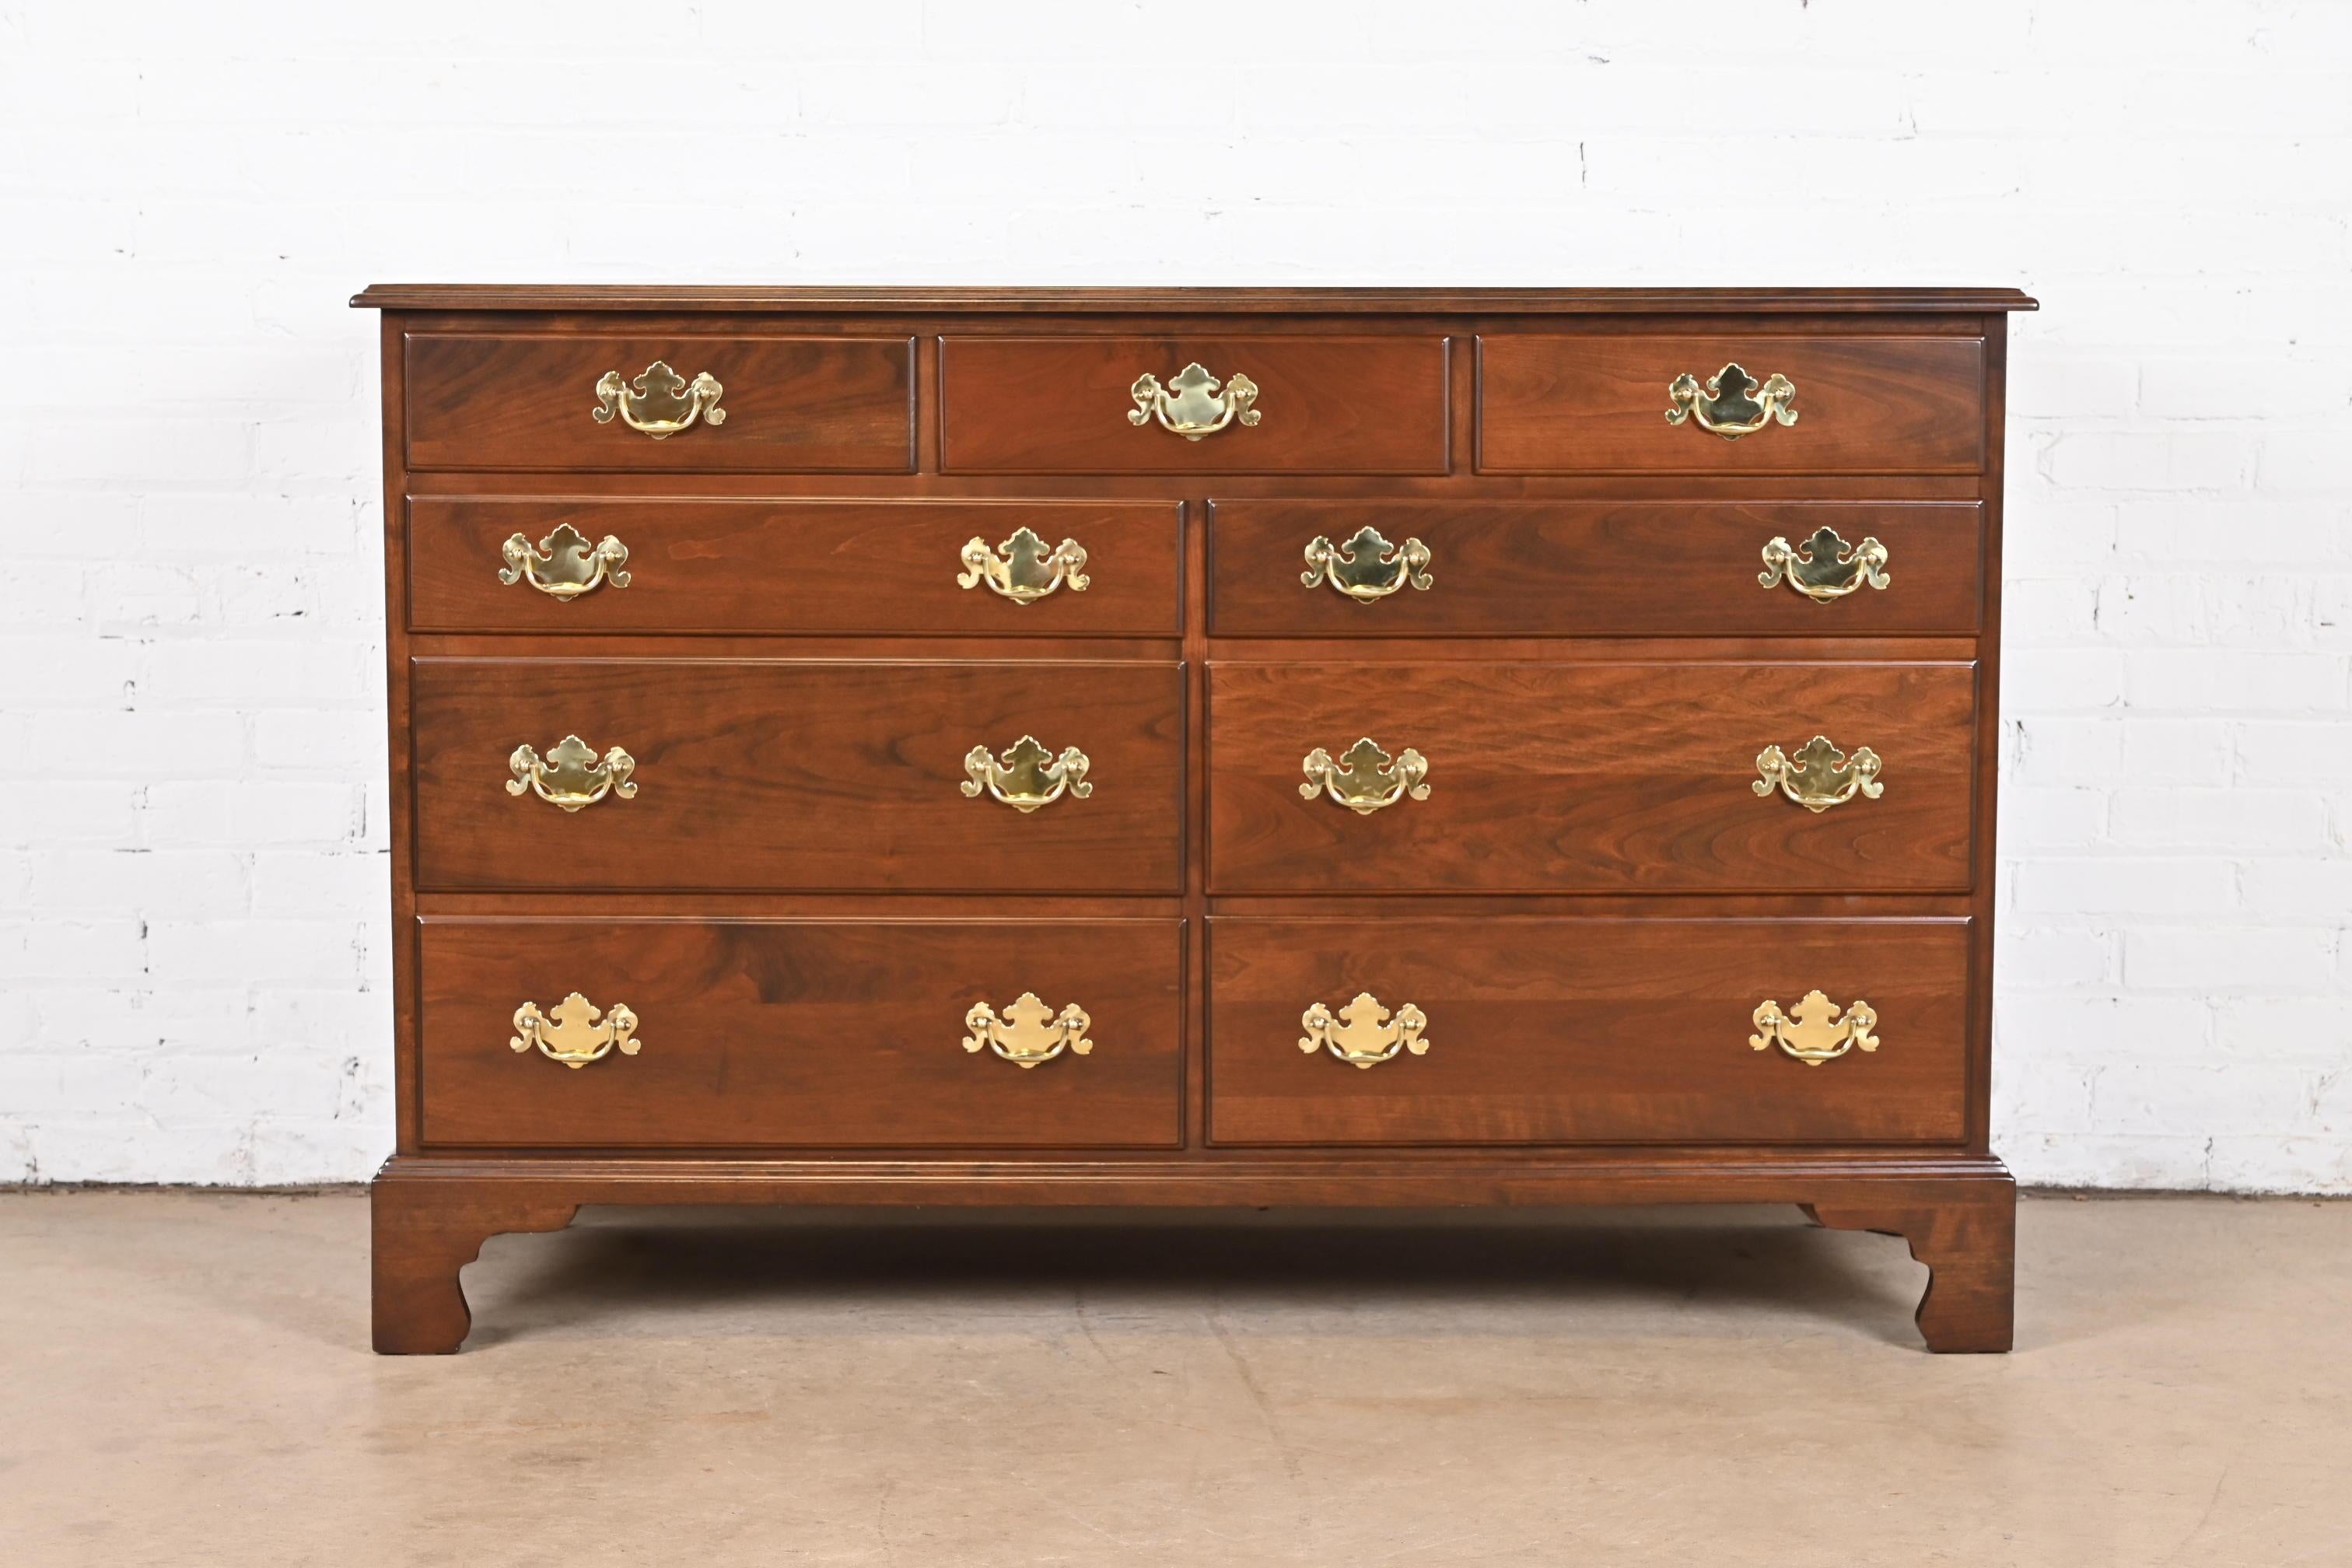 An exceptional American Chippendale or Georgian style nine-drawer dresser or credenza

By Henkel Harris

USA, Circa 1970s

Carved solid cherry wood, with original brass hardware.

Measures: 54.25